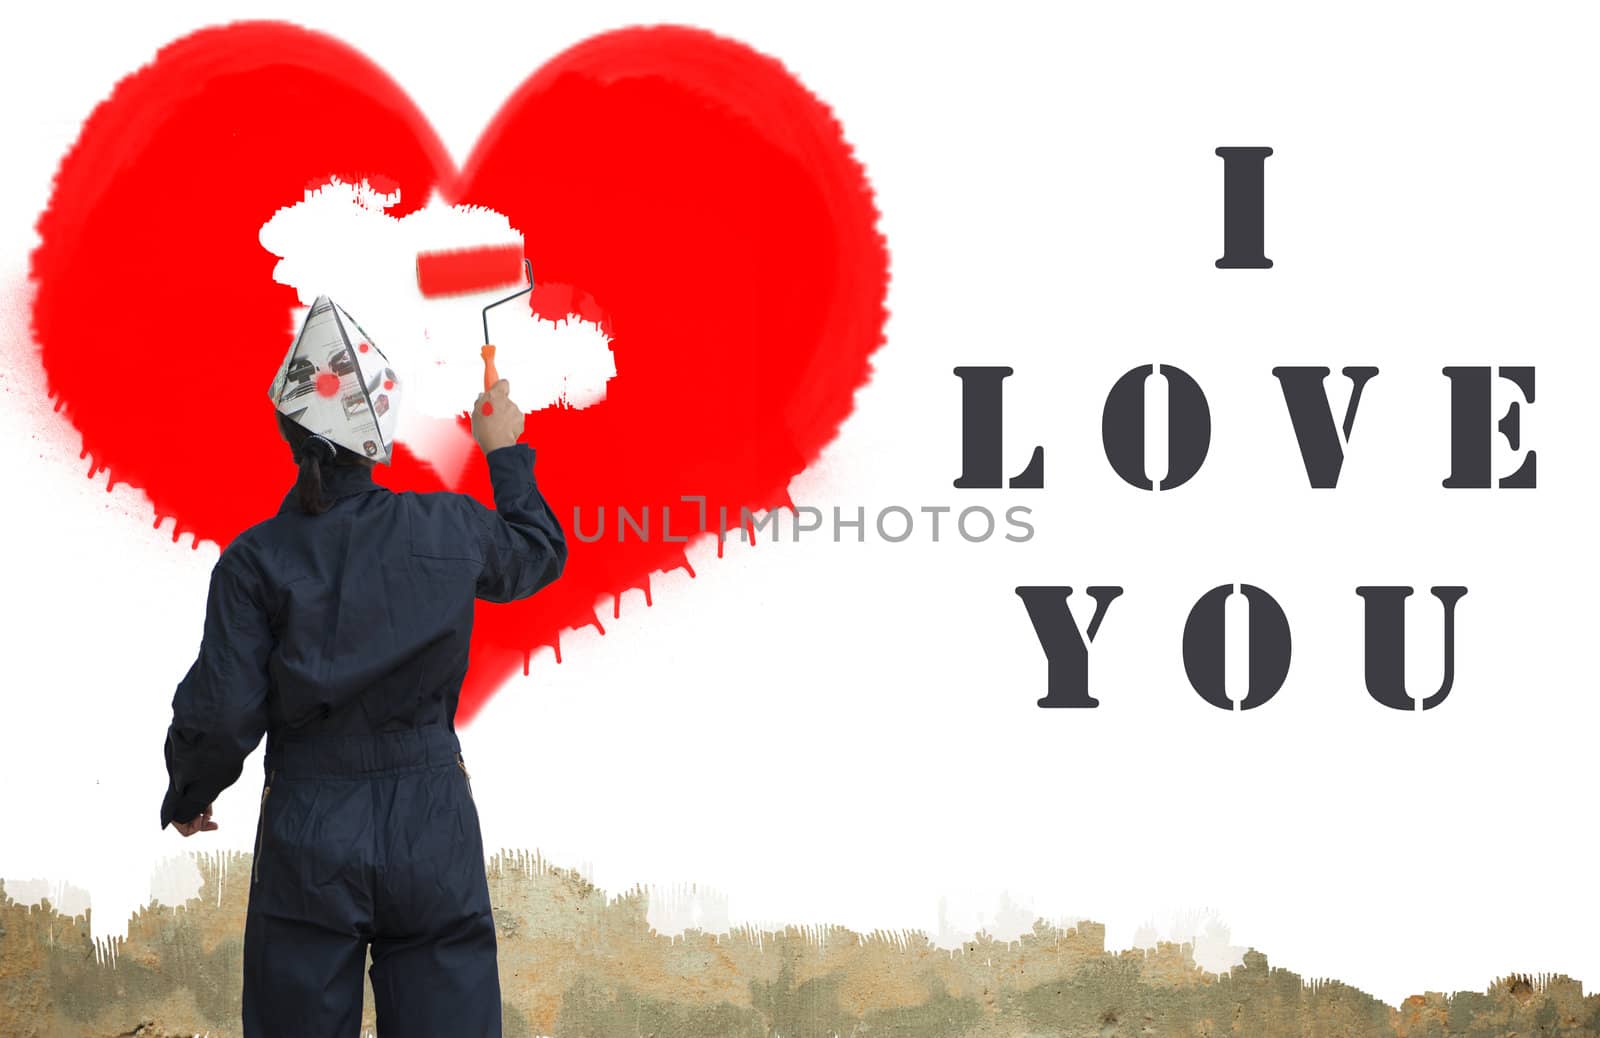 A woman is painting a red heart on a white wall